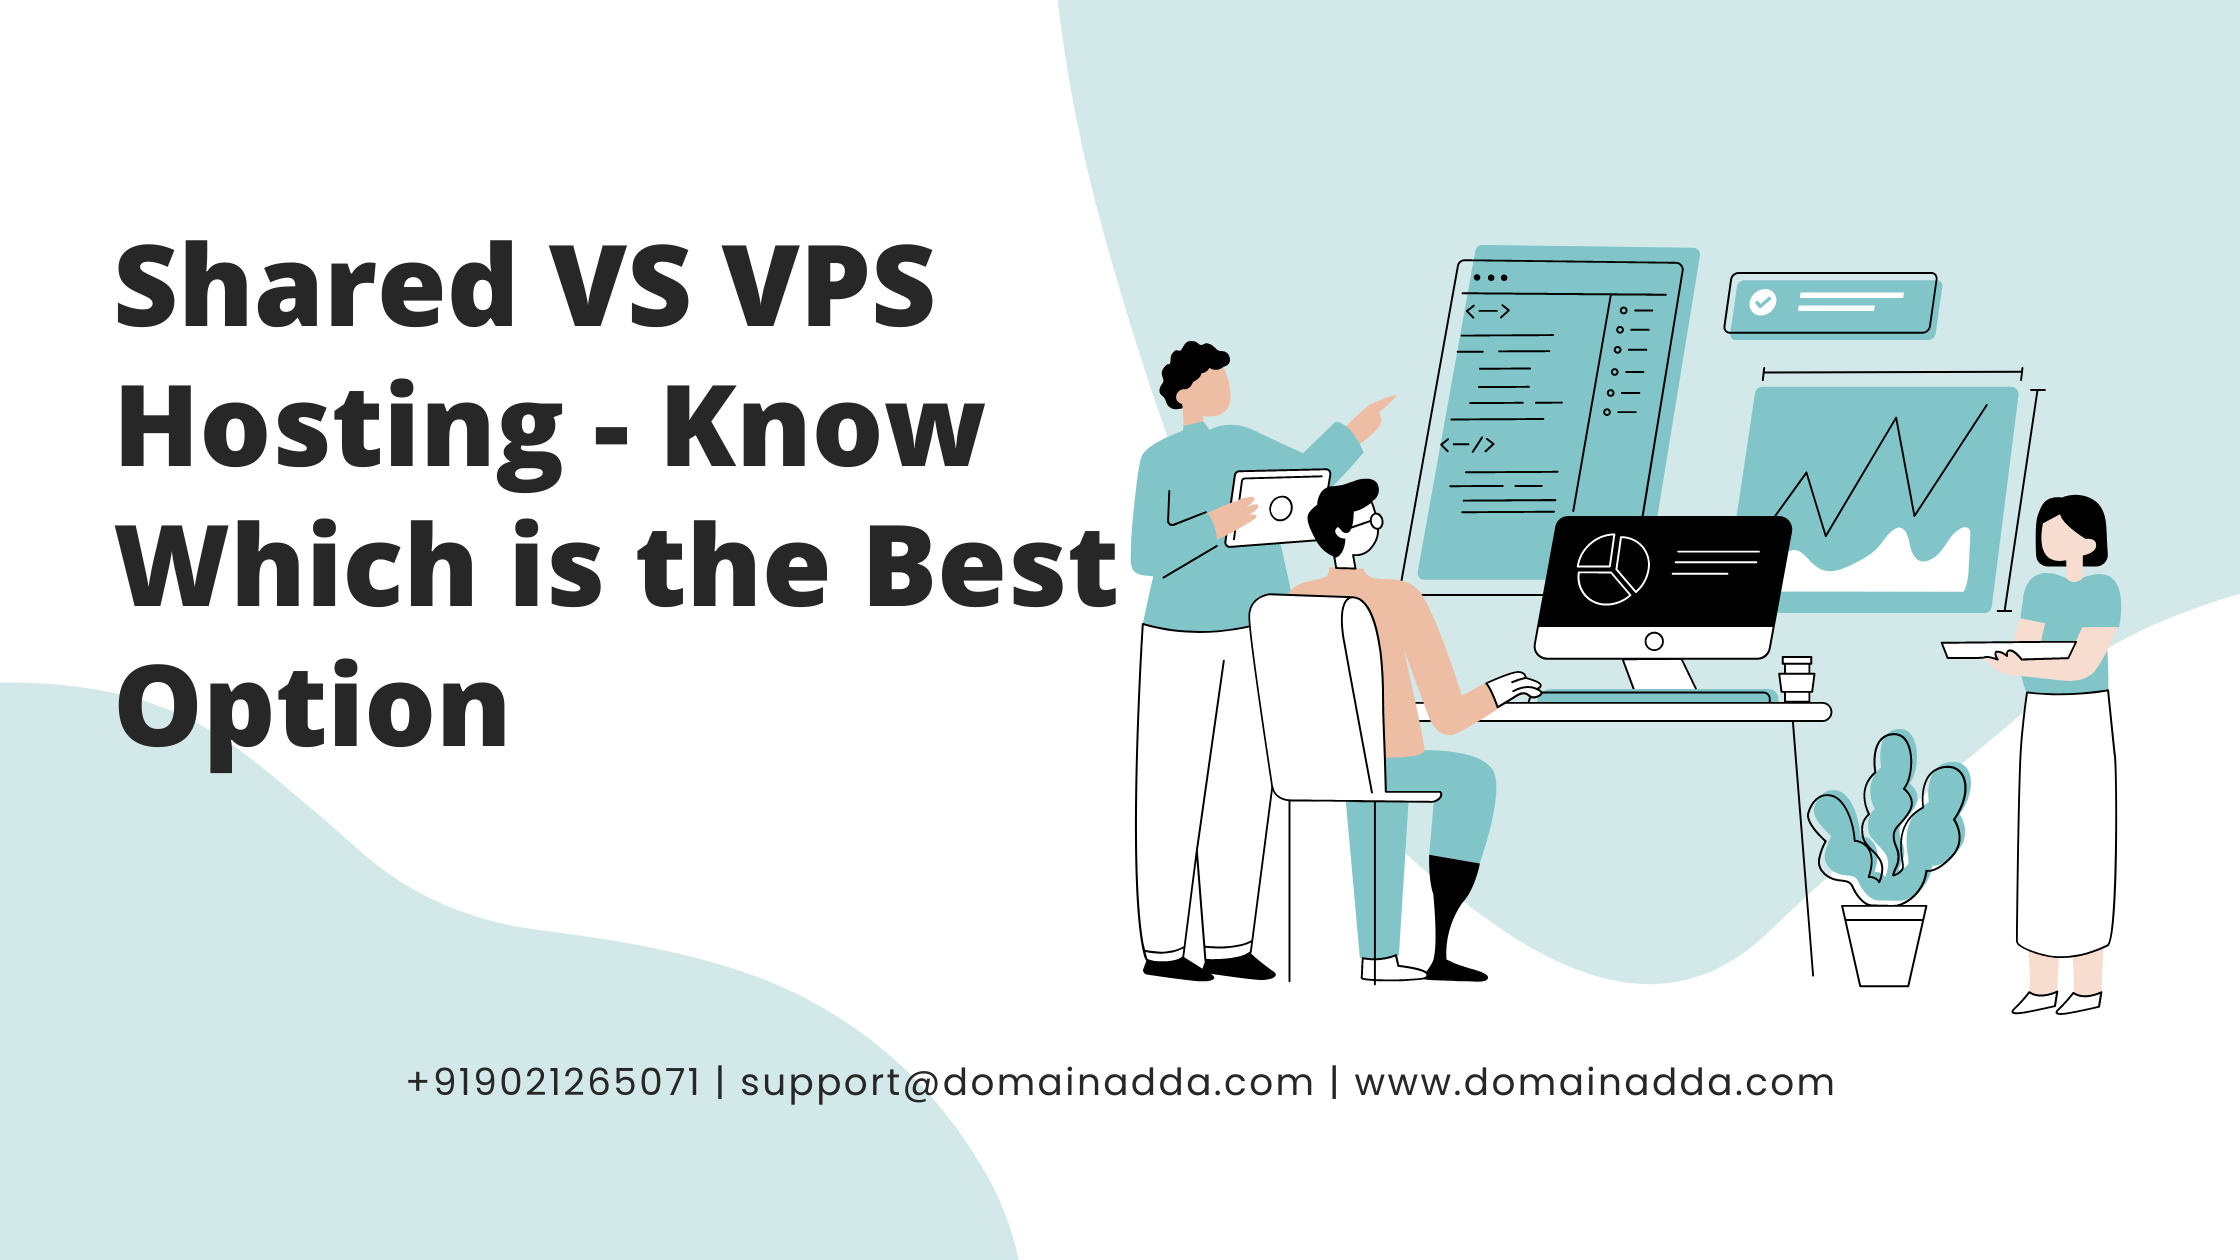 Shared VS VPS Hosting - Know which is the Best Option